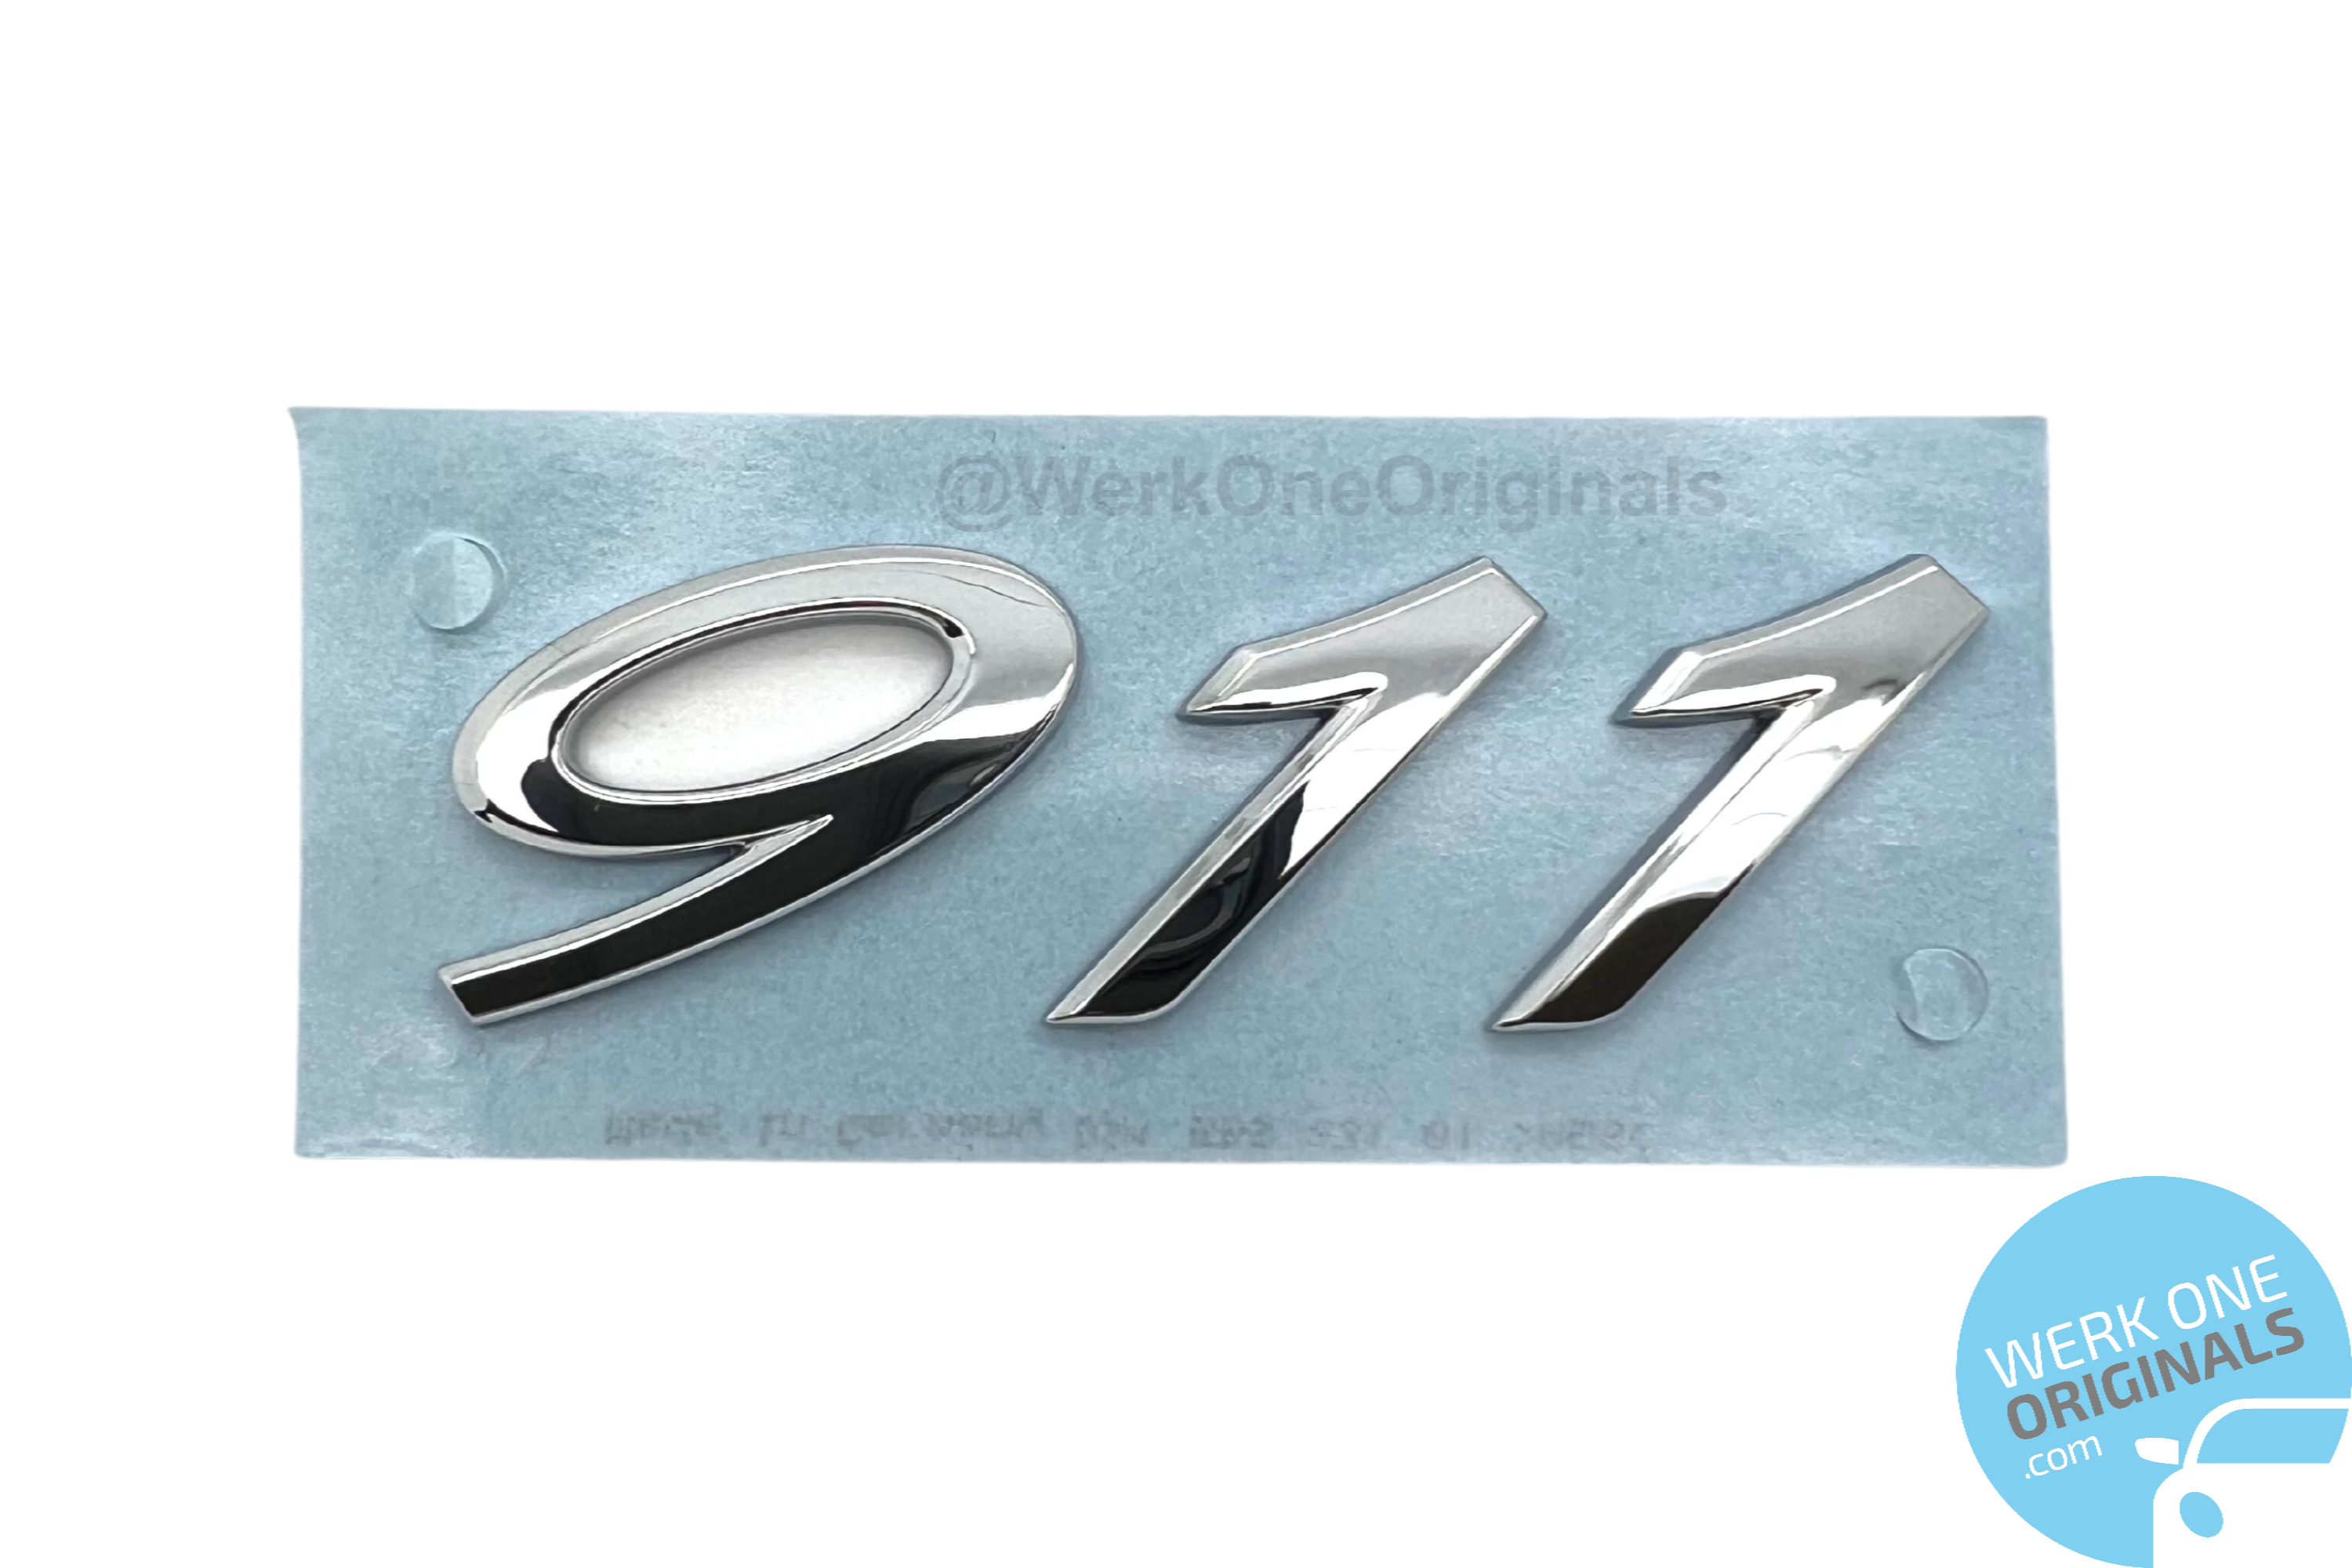 Porsche Official '911' Rear Badge Decal in Chrome Silver for 911 Type 991 Models